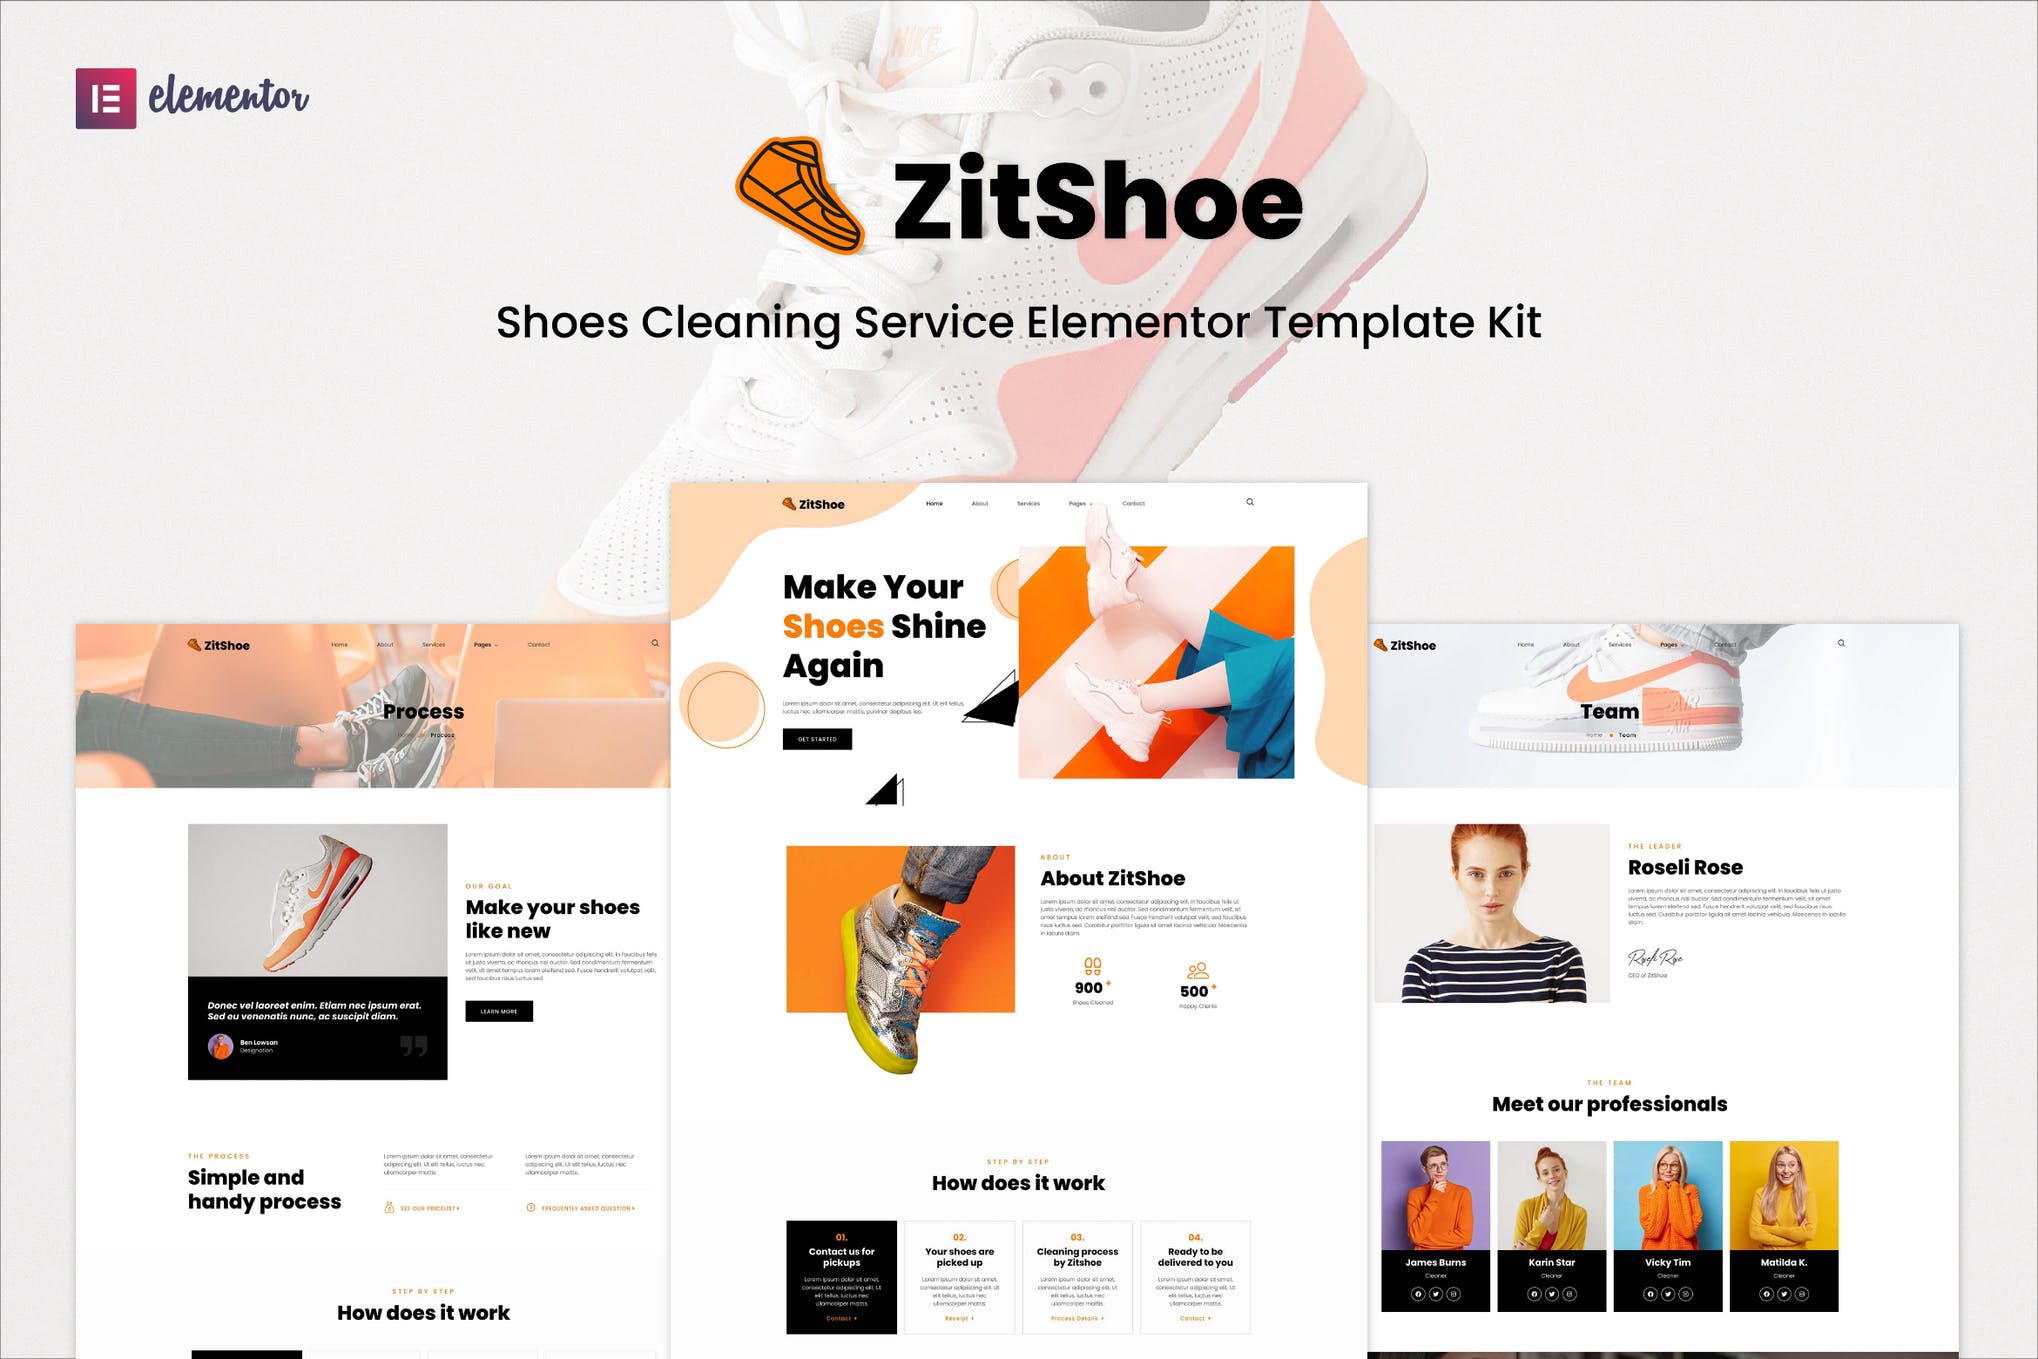 Zitshoe - Shoes Cleaning Service Elementor Template Kit